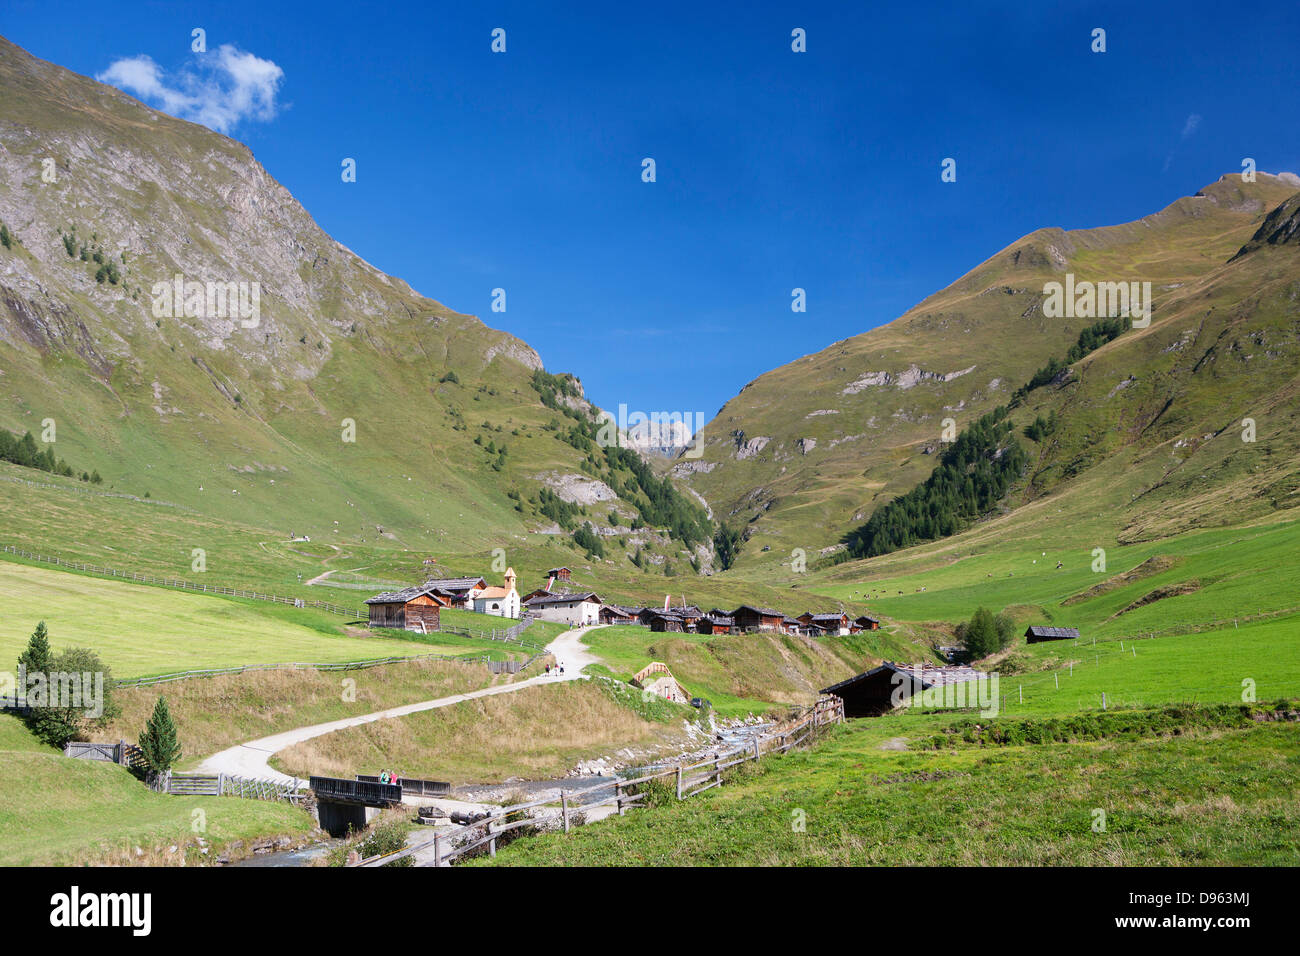 Italy, View of Pfunderer Berge with hikers crossing bridge near mountain village Stock Photo